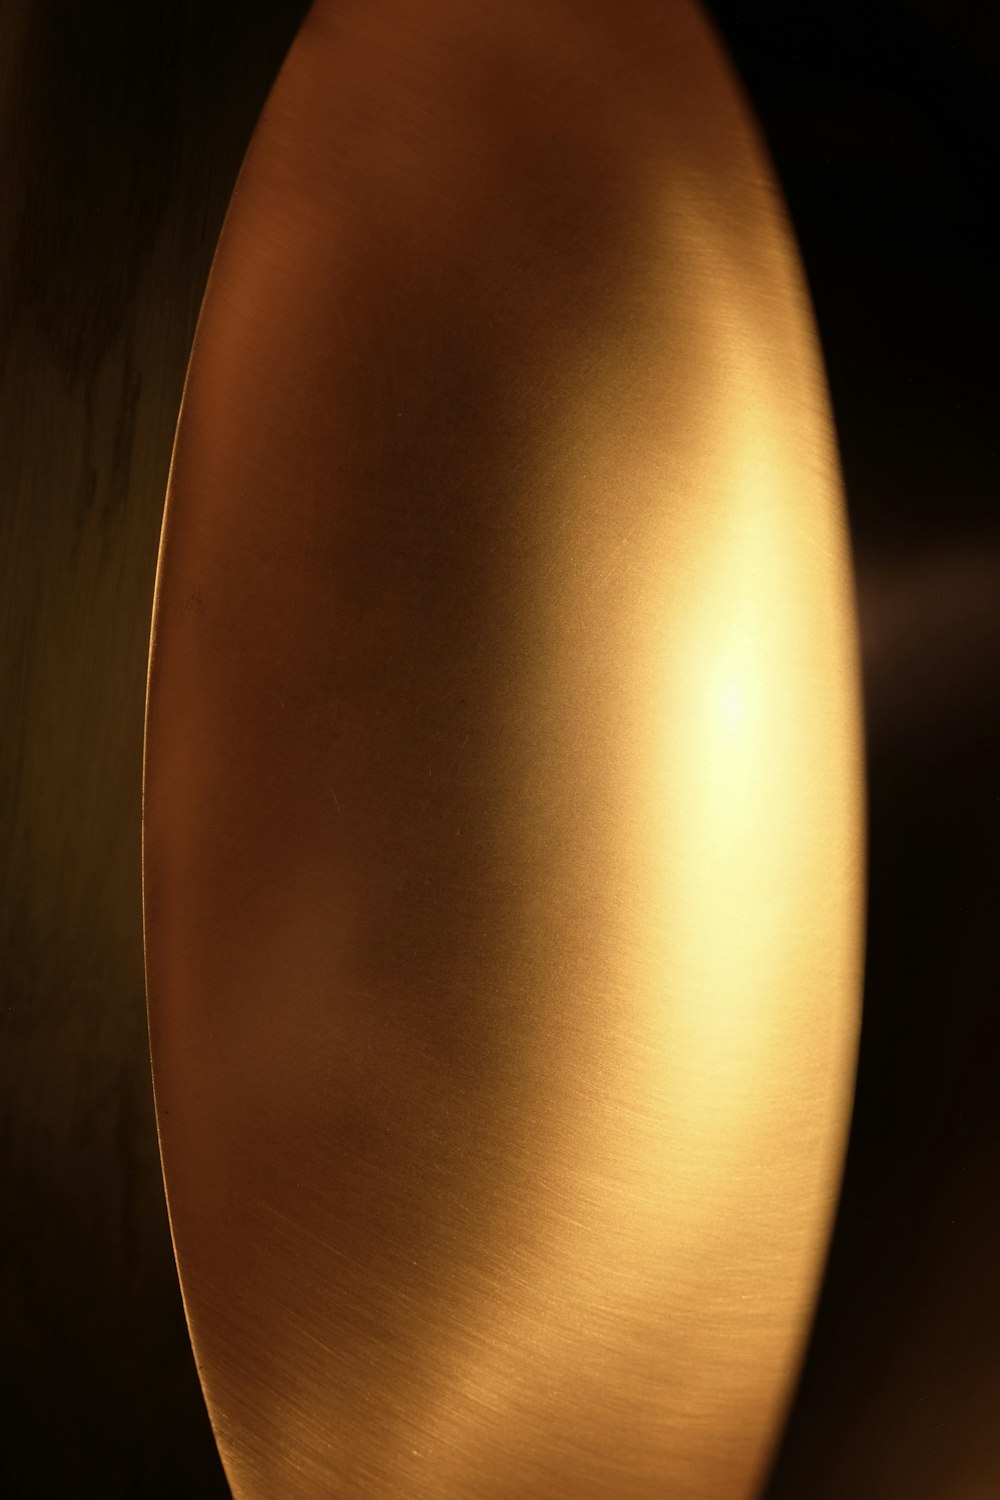 a close up of a shiny metal object